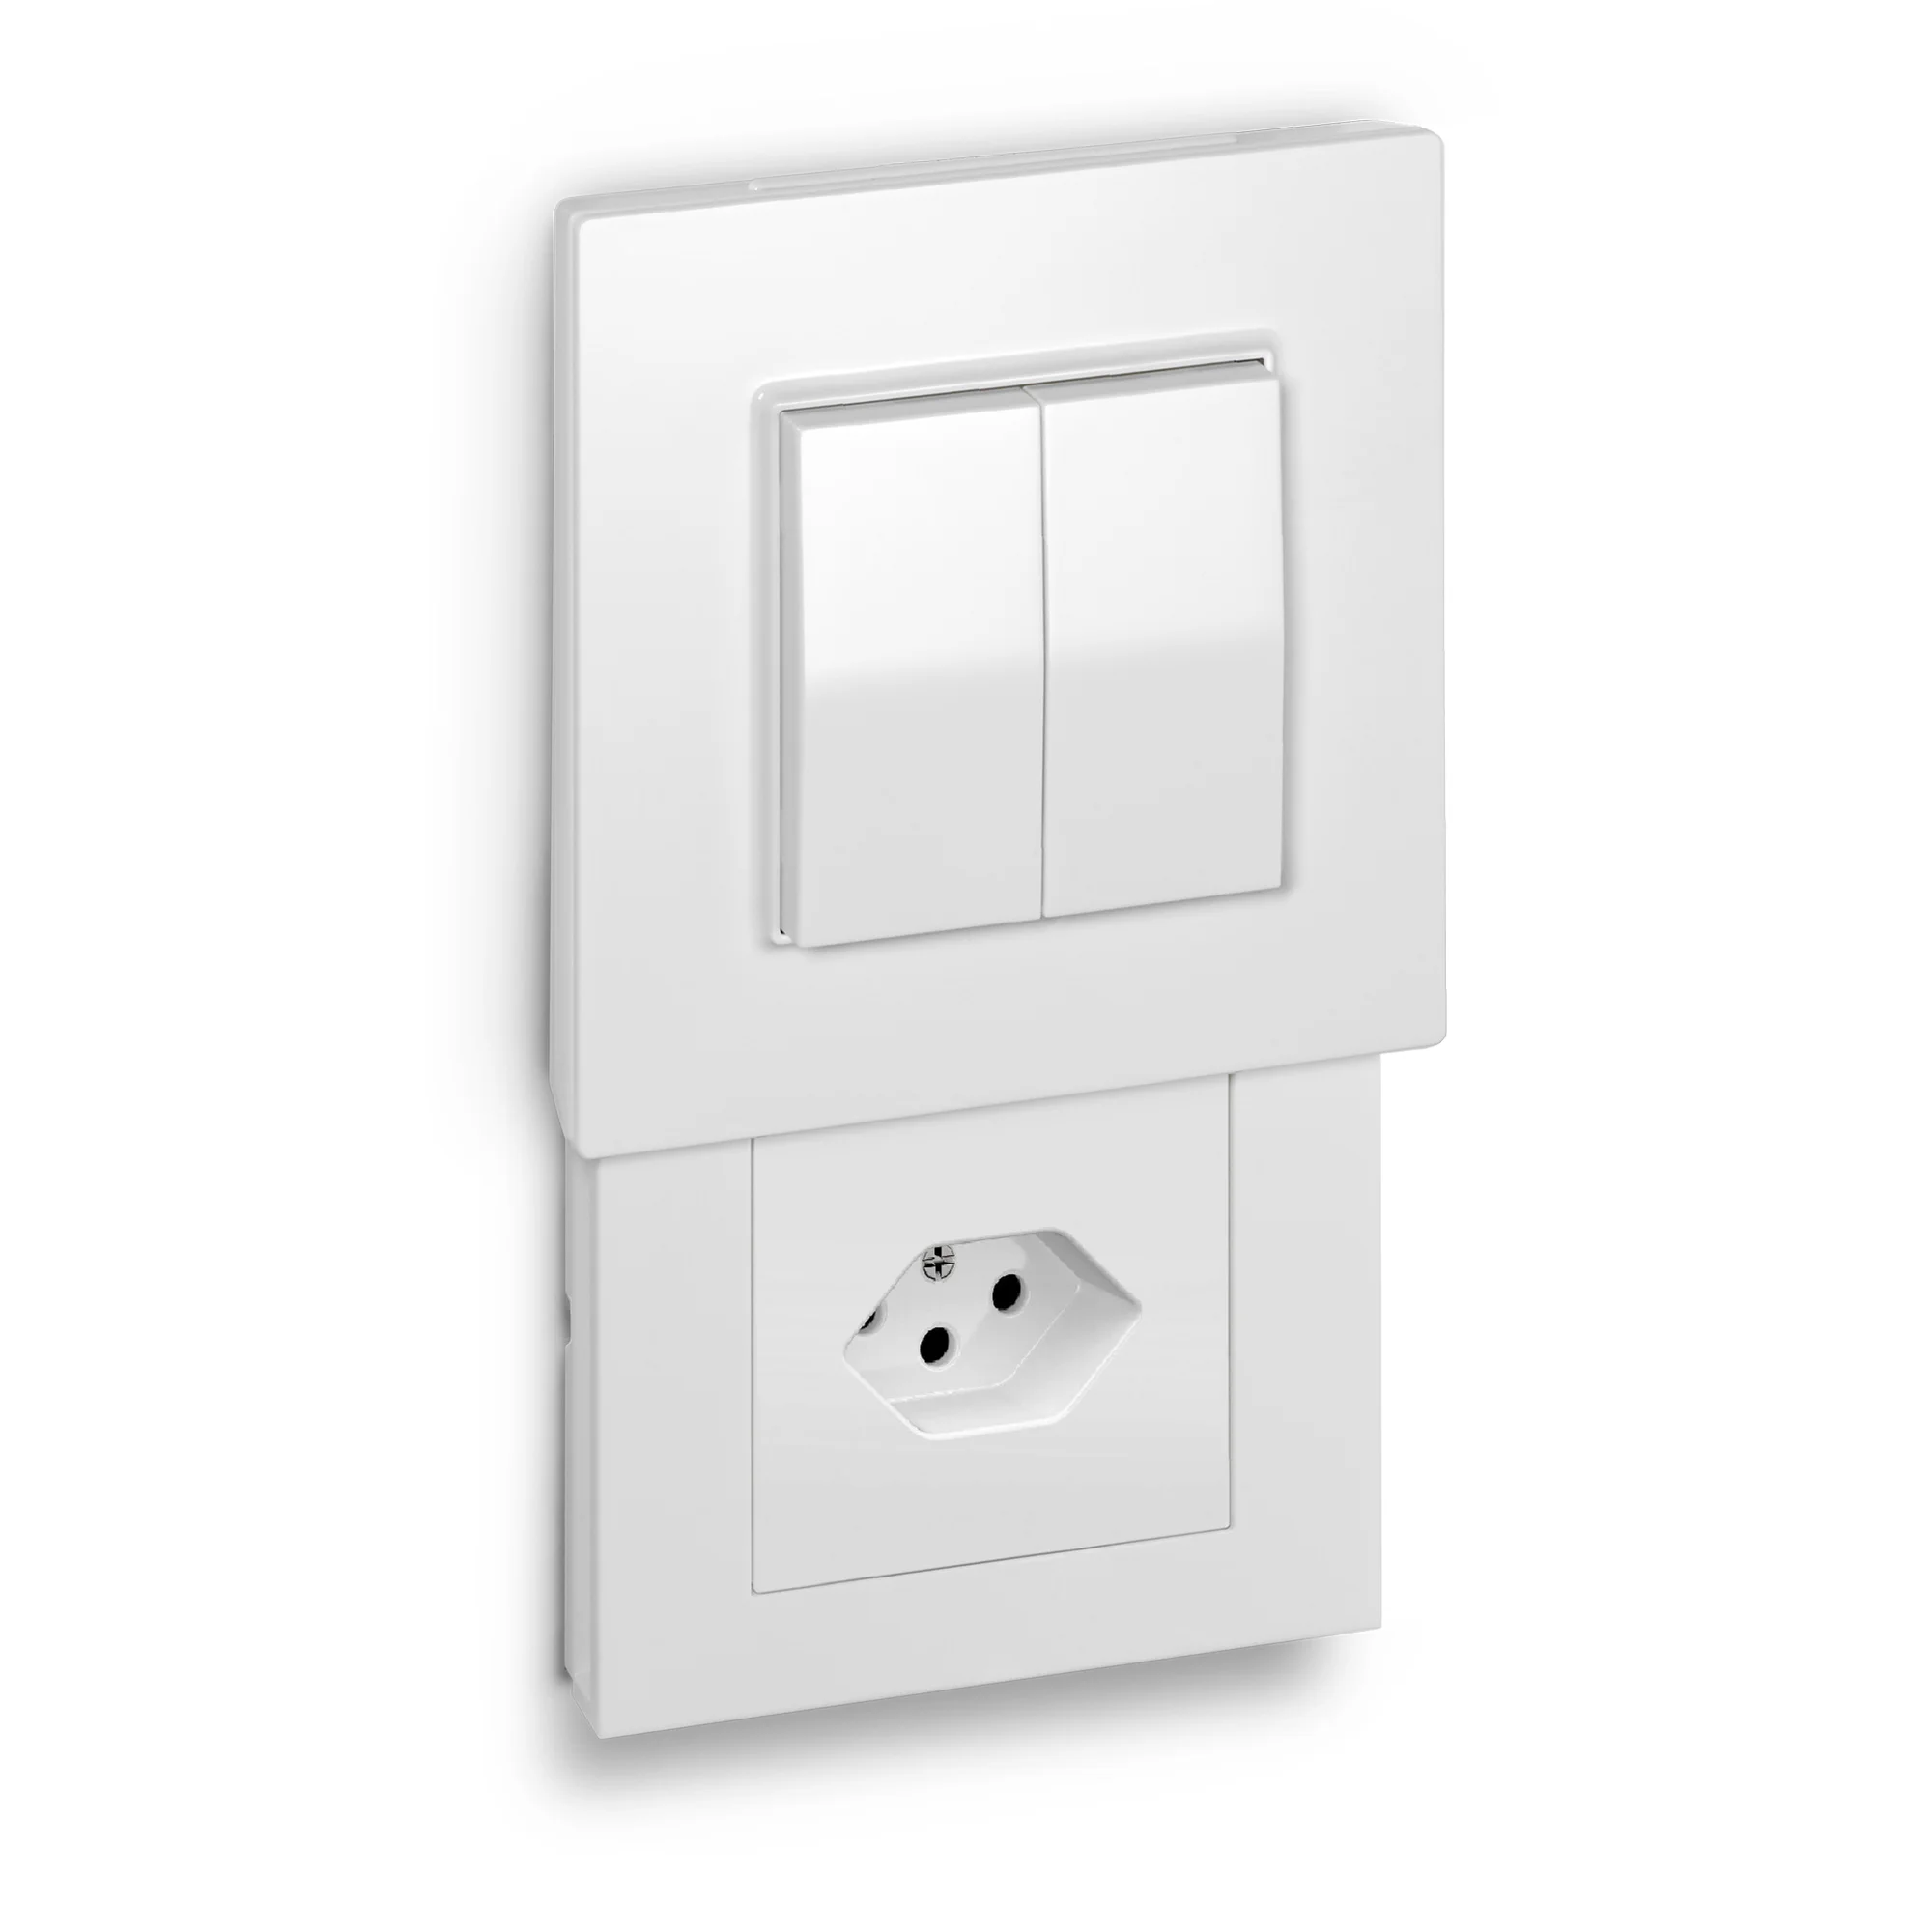 Hidden Socket | Versteckdose® with EnOcean switch with socket insert for plug type J (CH)